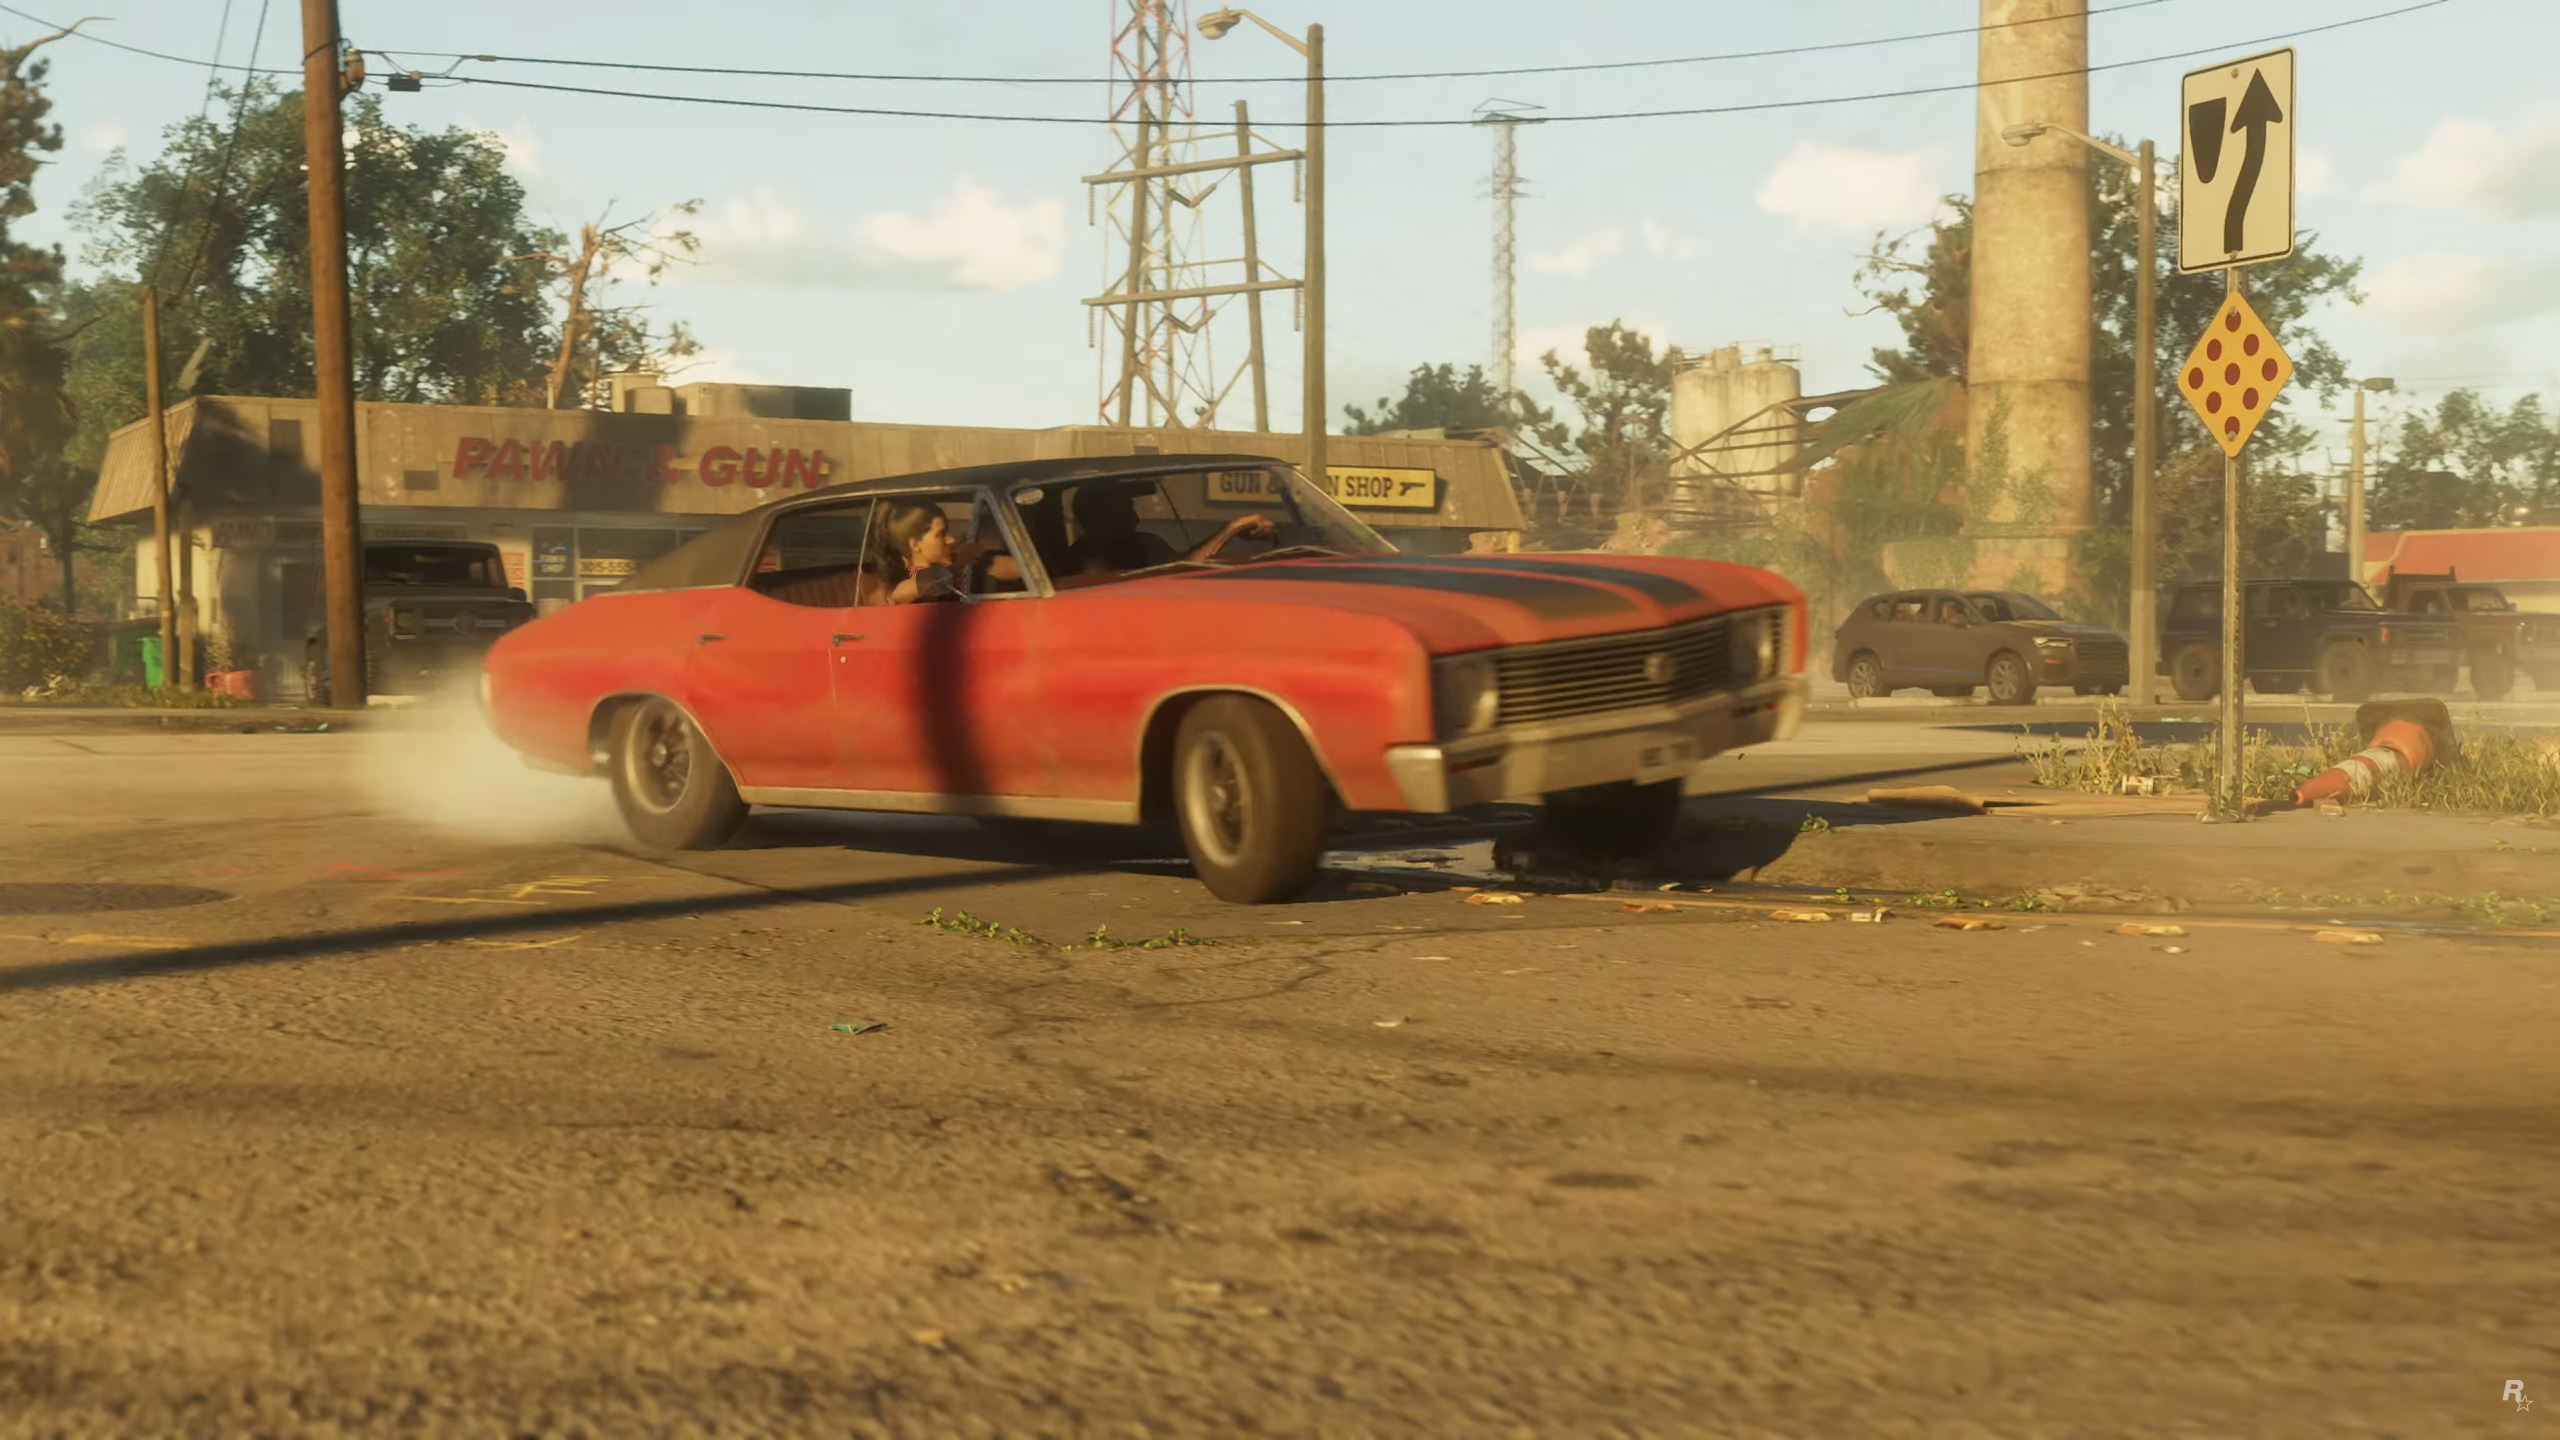 Grand Theft Auto 6 trailer arrives early, but the game won't until